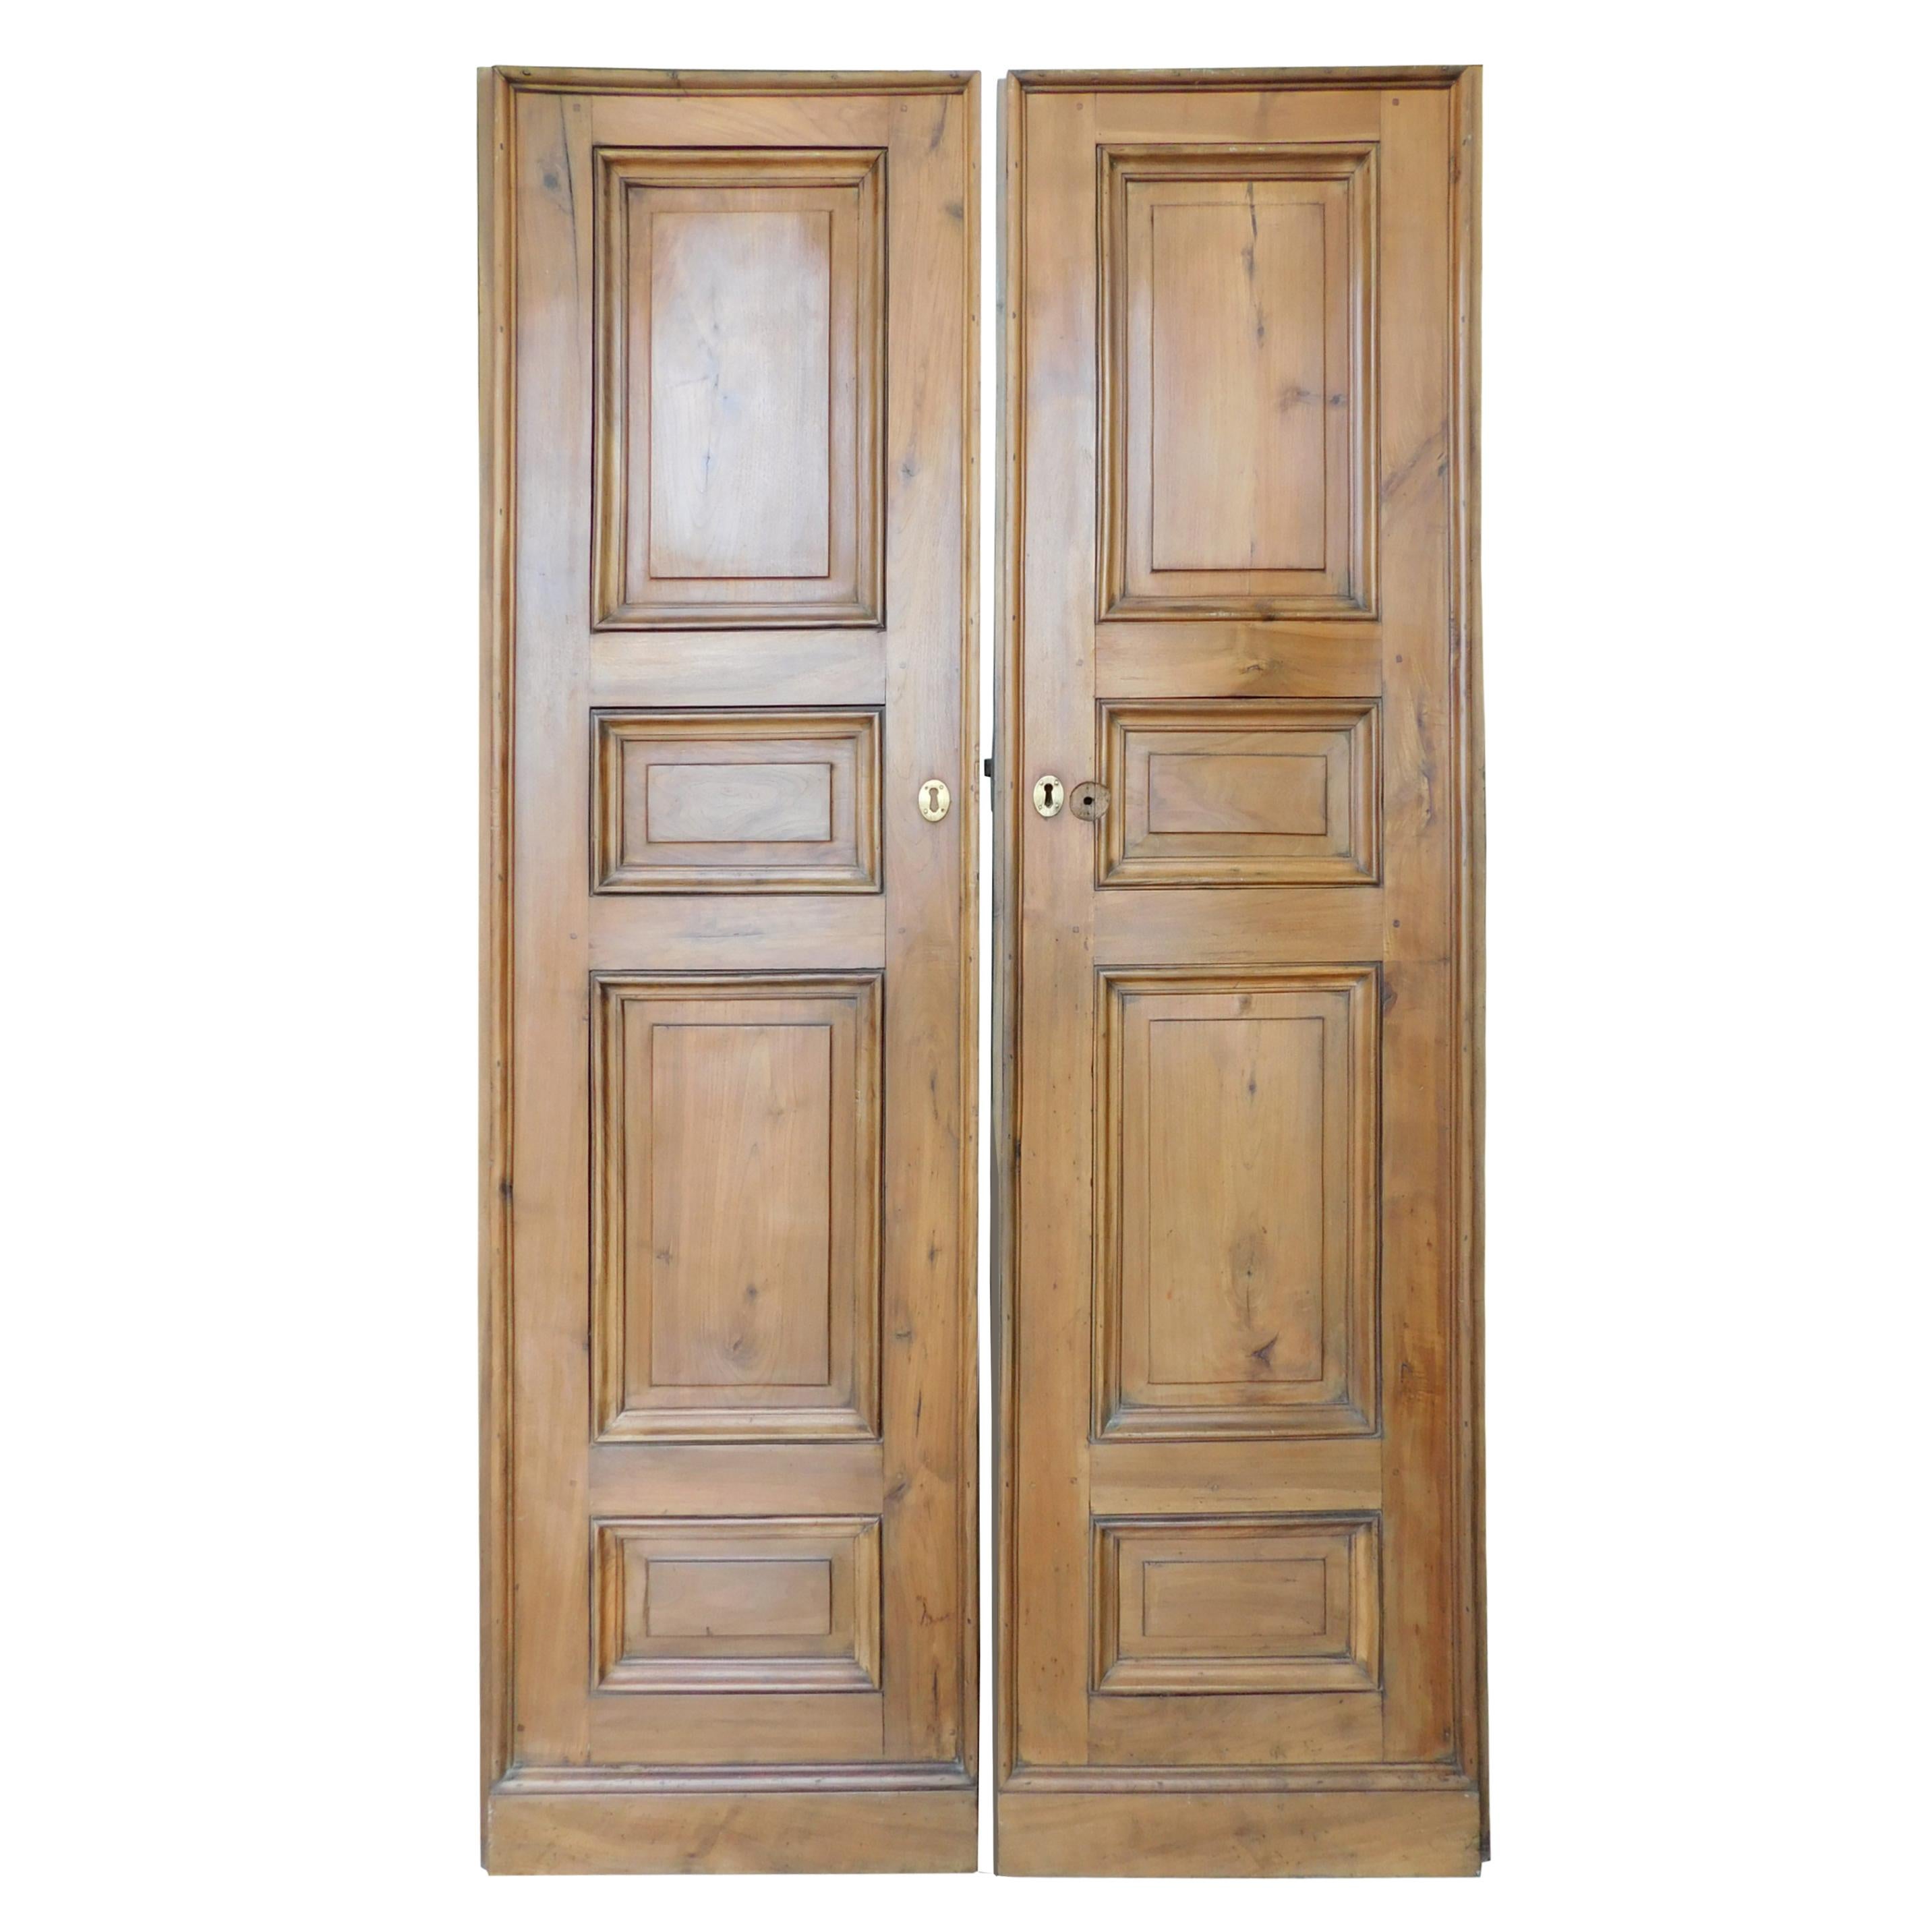 Antique Double Walnut Doors with Panels Carved, 1 Pairs, 18th Century Italy